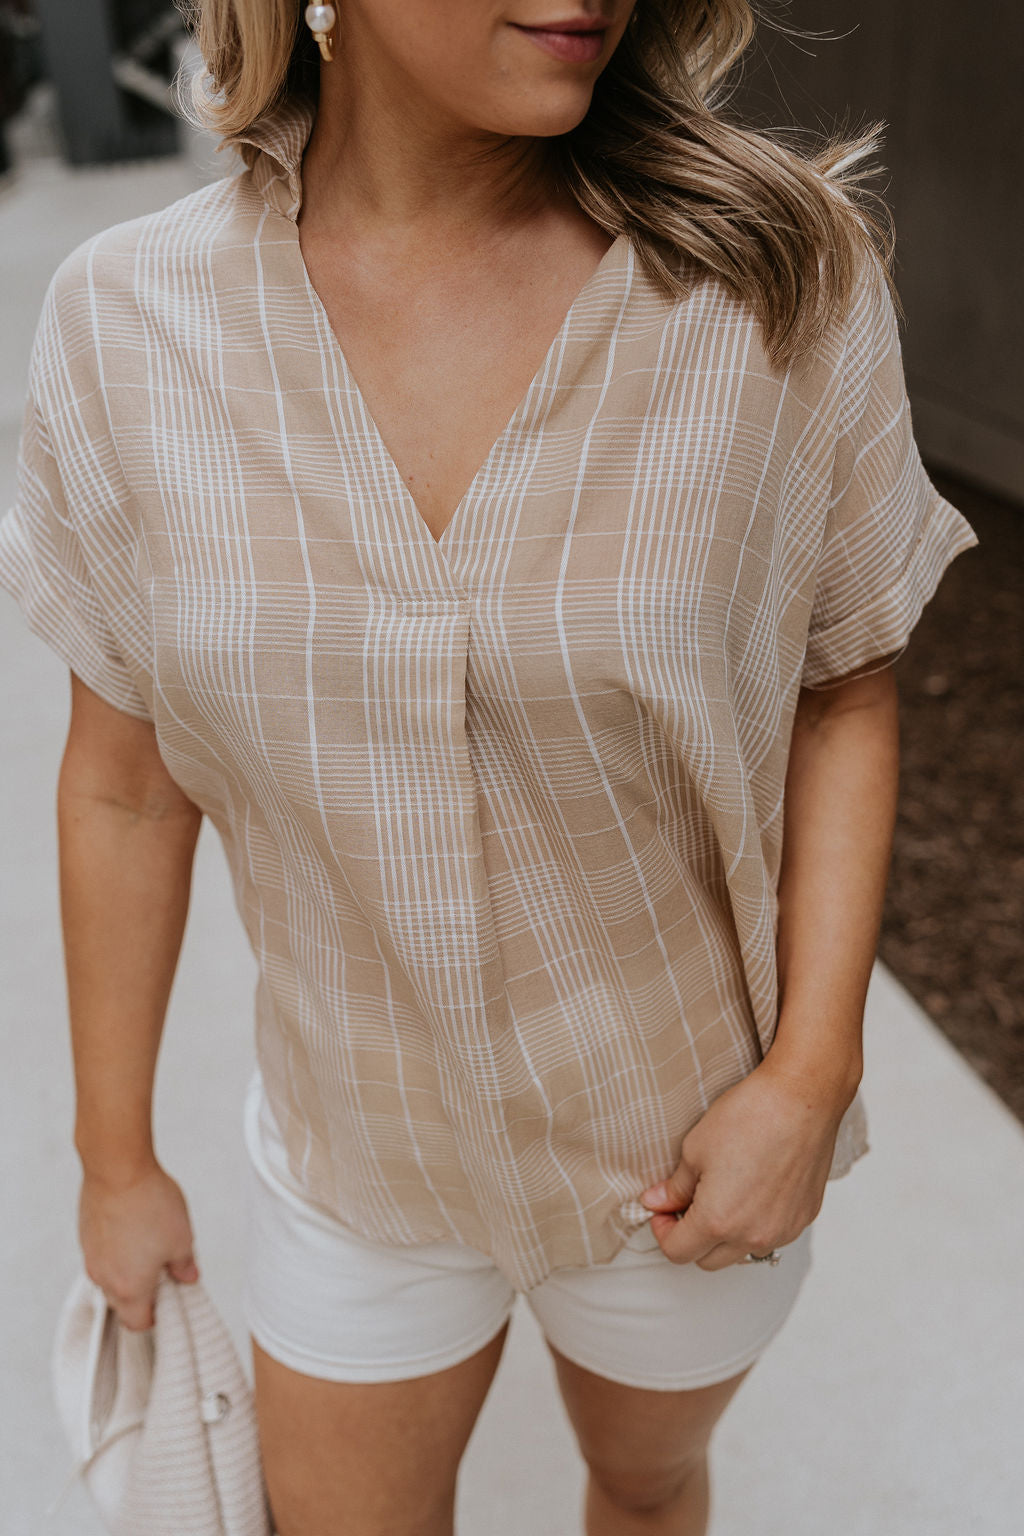 Close up view of female model wearing the Kali Light Beige Plaid Short Sleeve Top which features Taupe and White Cotton Fabric, Plaid Print, Short Sleeves and V-Neckline with Collar